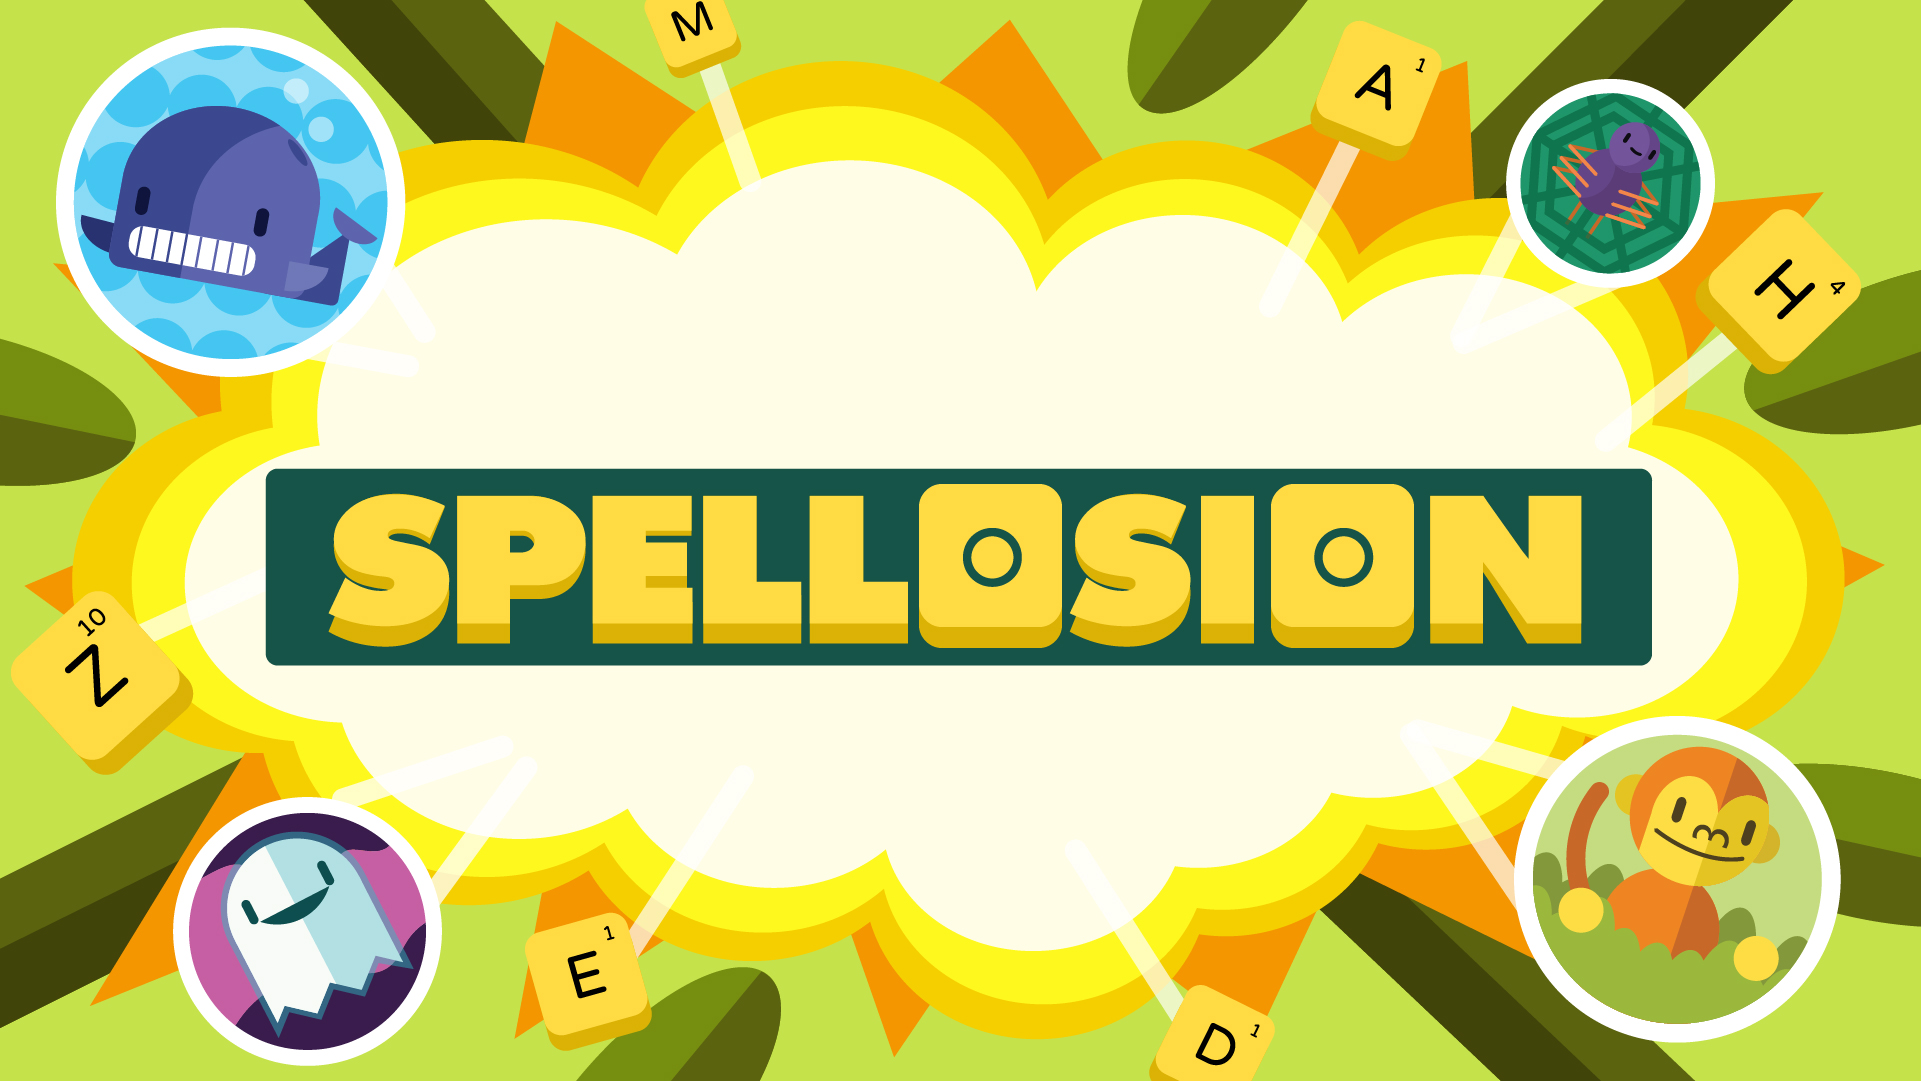 Spellosion-Screens-04-outlined-14.jpg